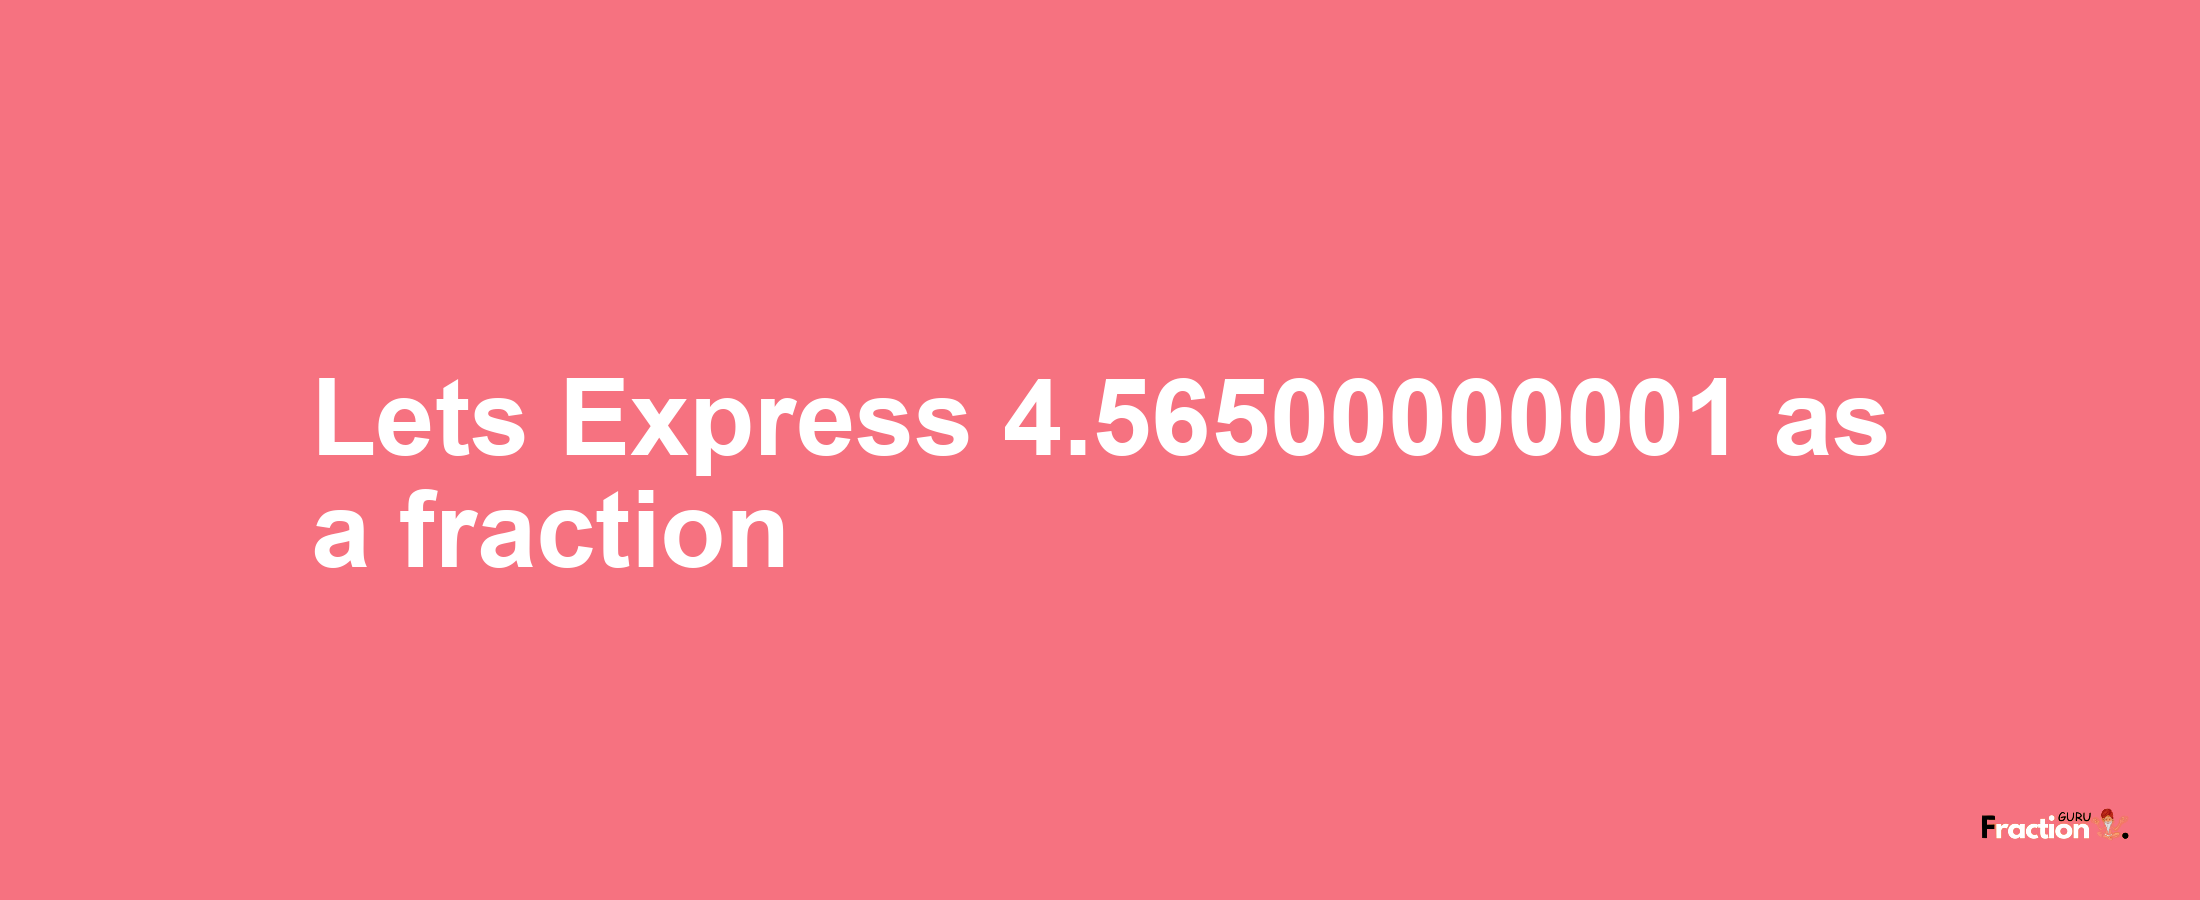 Lets Express 4.56500000001 as afraction